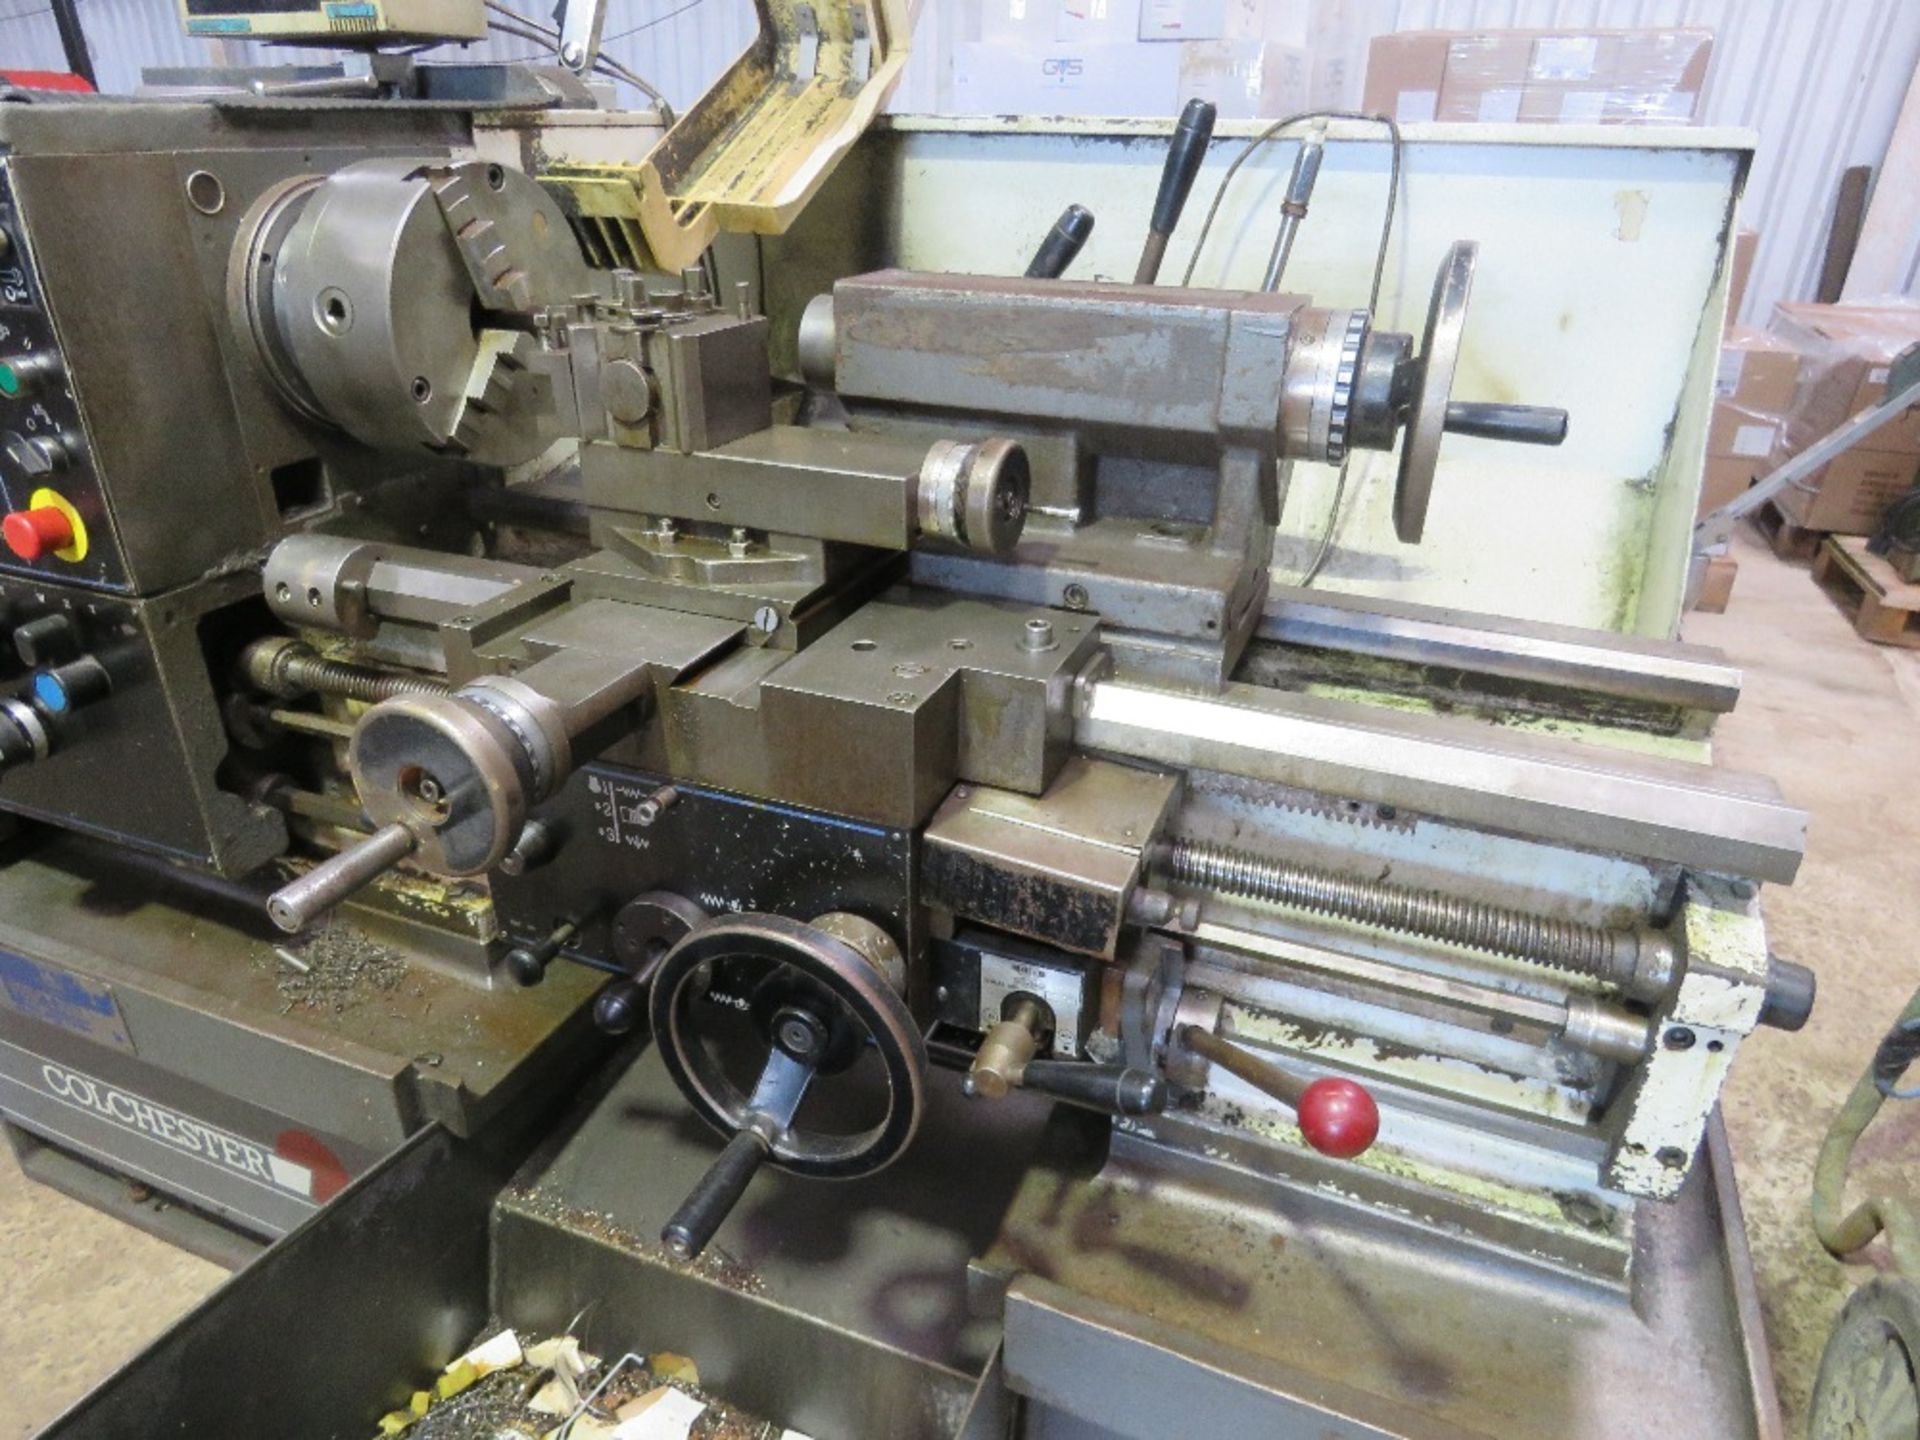 COLCHESTER TRIUMPH 2500 METAL WORKING LATHE, 3 PHASE POWERED. - Image 2 of 9